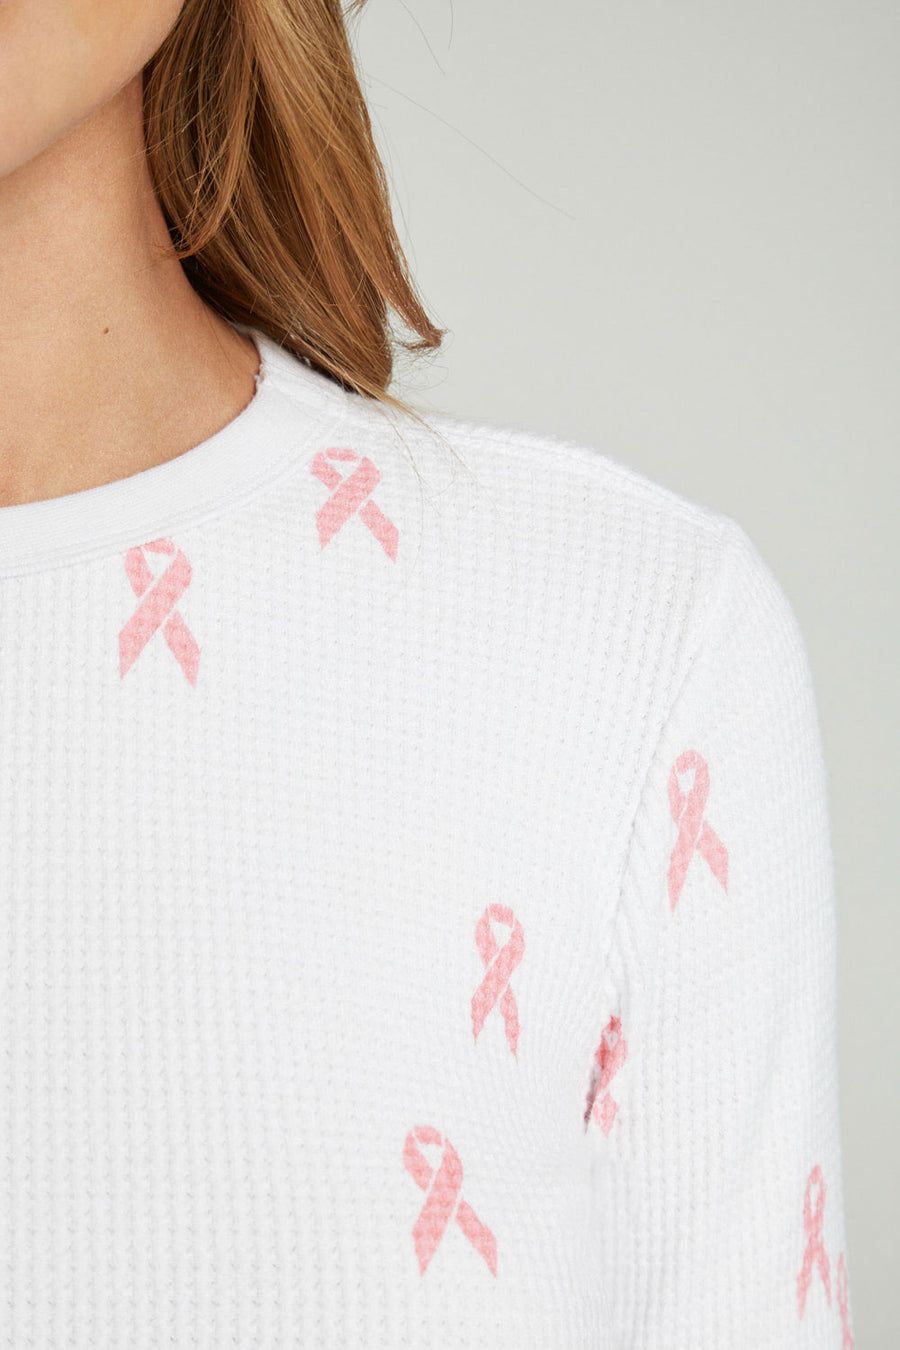 "All Over Pink Ribbon" Breast Cancer Awareness Charity Tee WOMENS chaserbrand